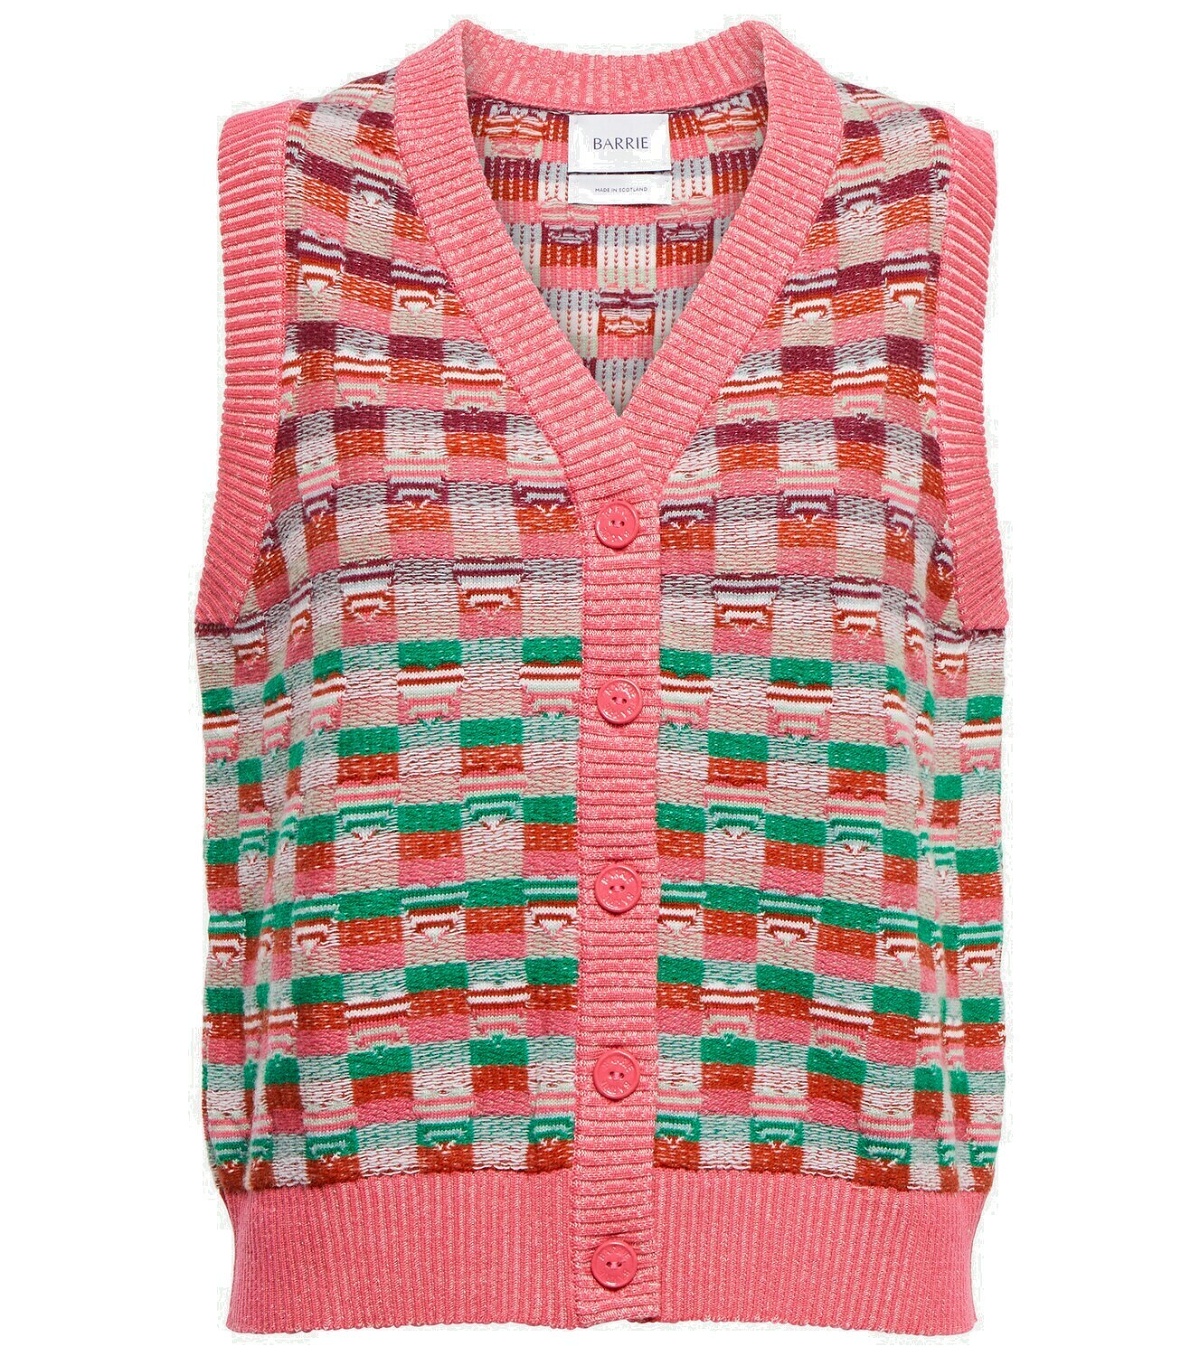 Photo: Barrie Jacquard cashmere and wool sweater vest